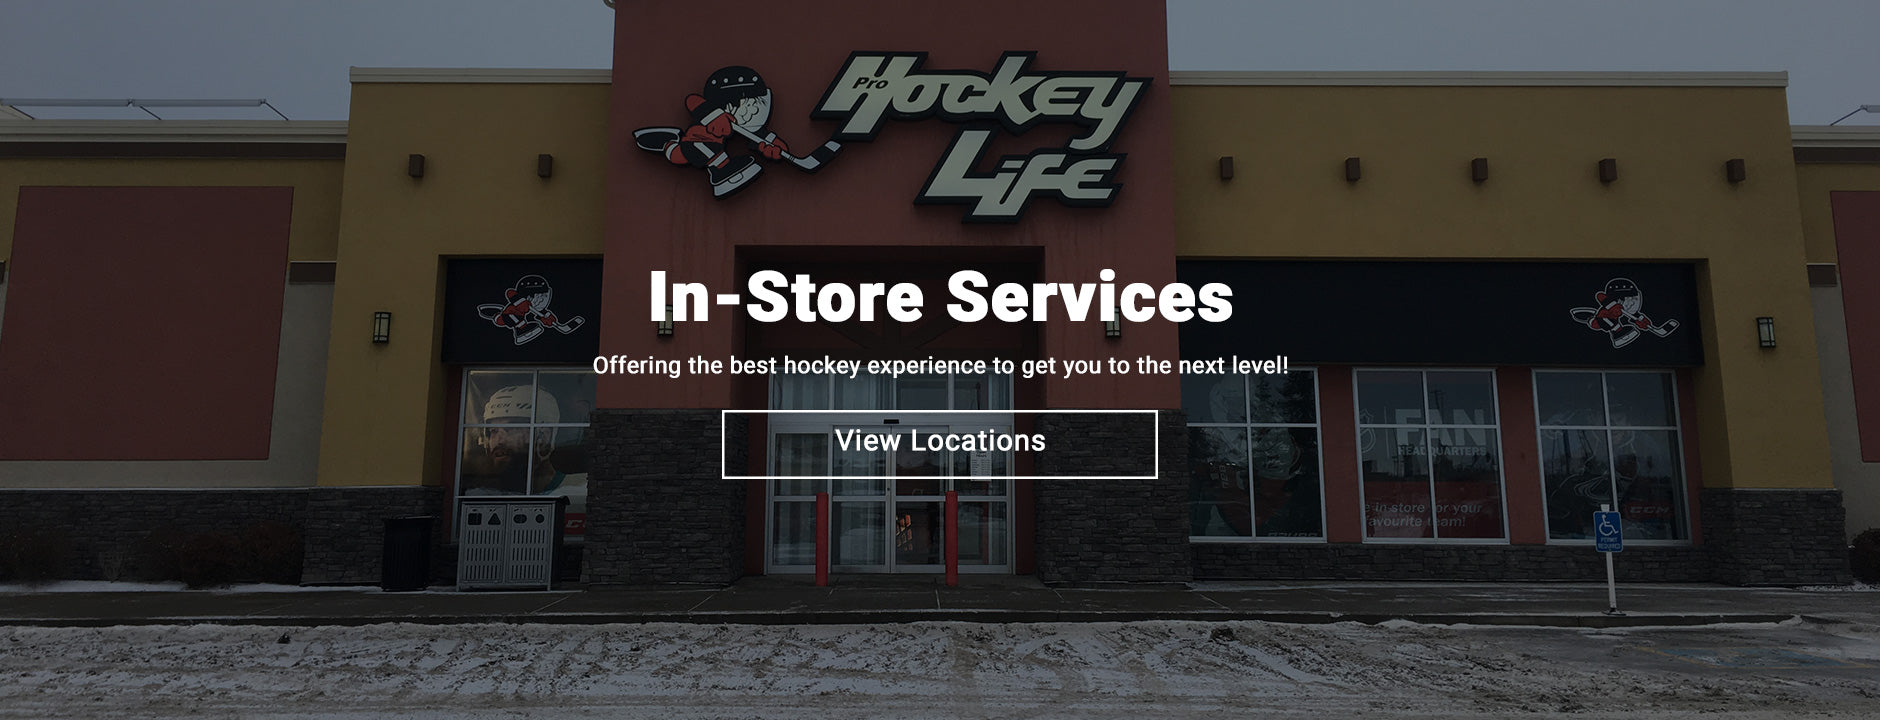 In-Store Services Pro Hockey Life